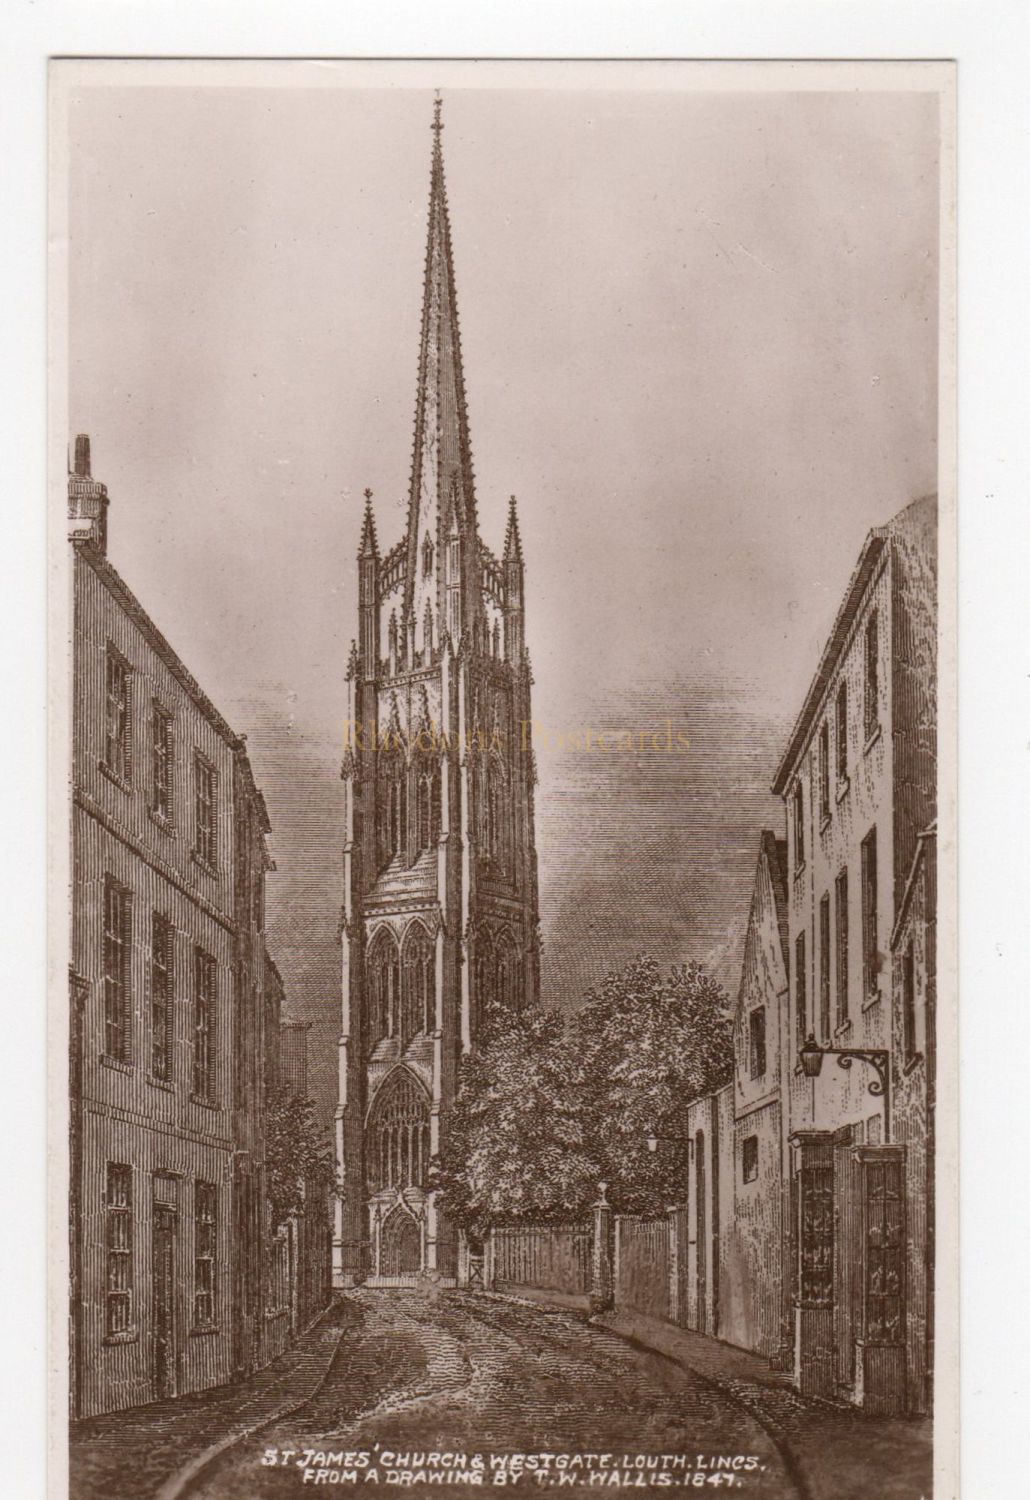 St James Church Westgate, Louth, Lincs - C1940s Postcard From A Drawing By 